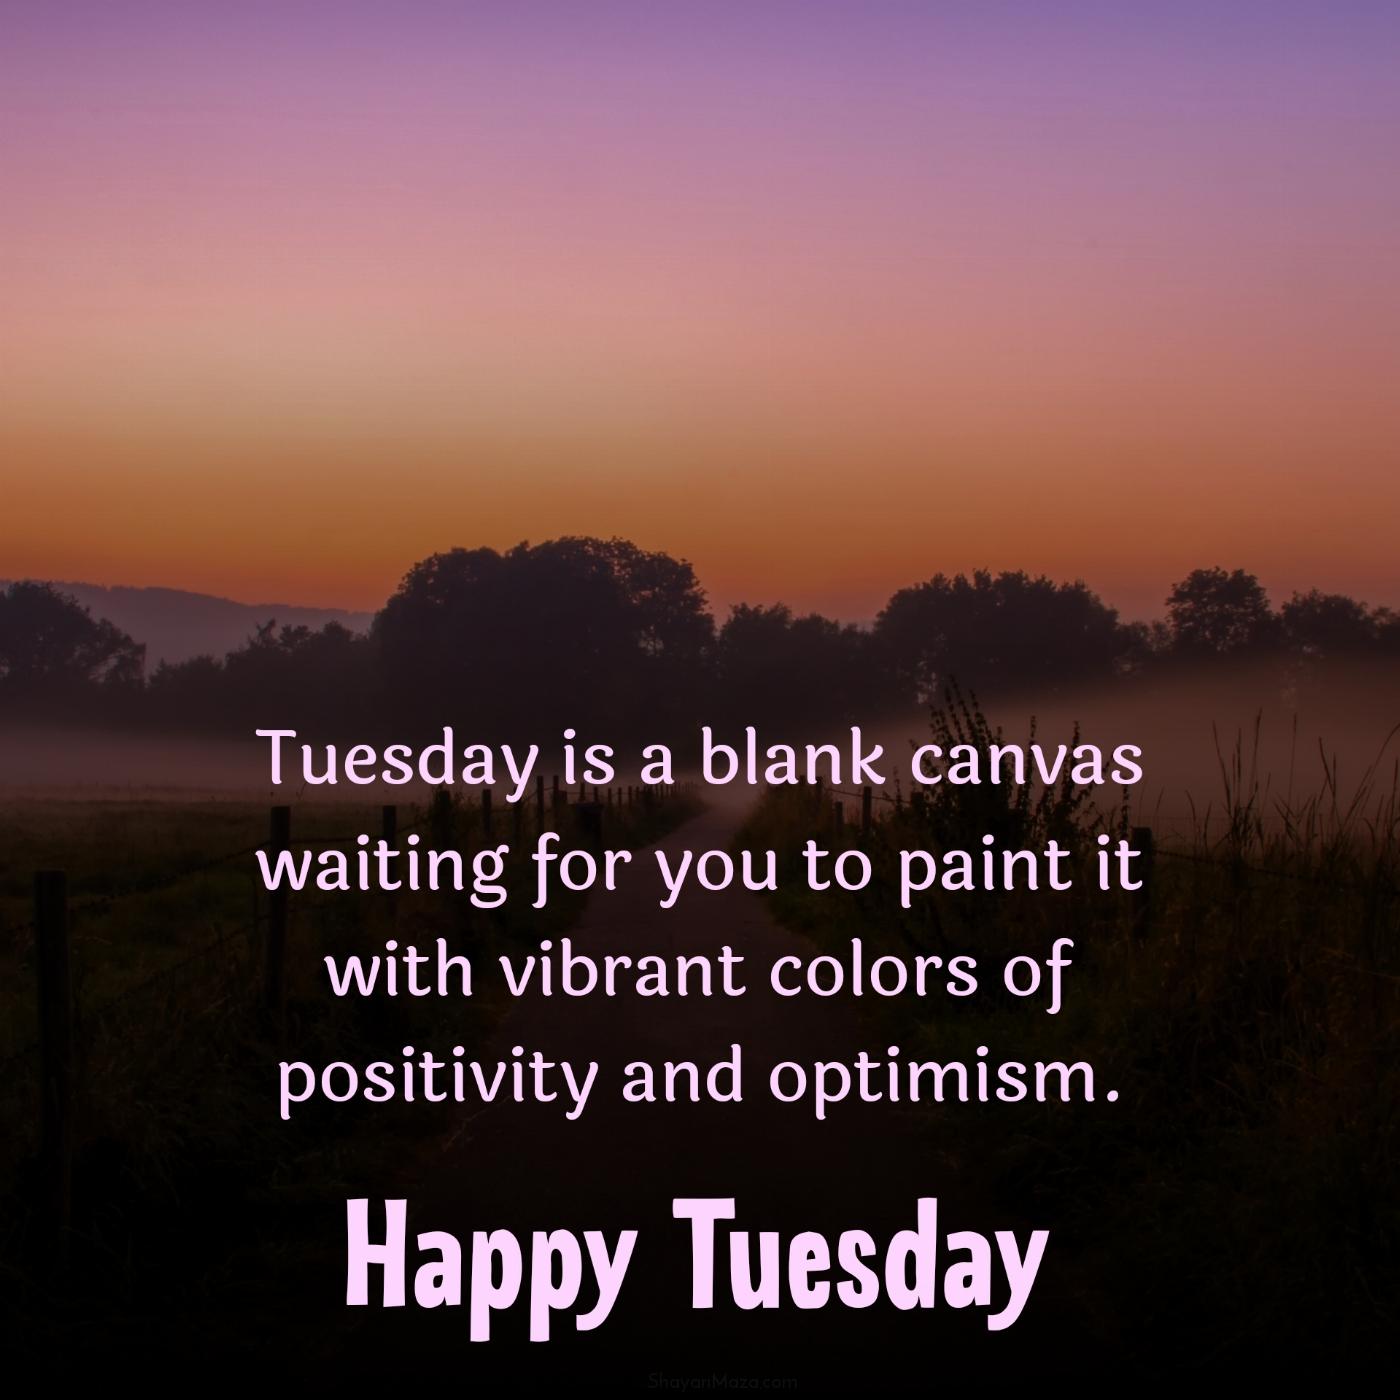 Tuesday is a blank canvas waiting for you to paint it with vibrant colors